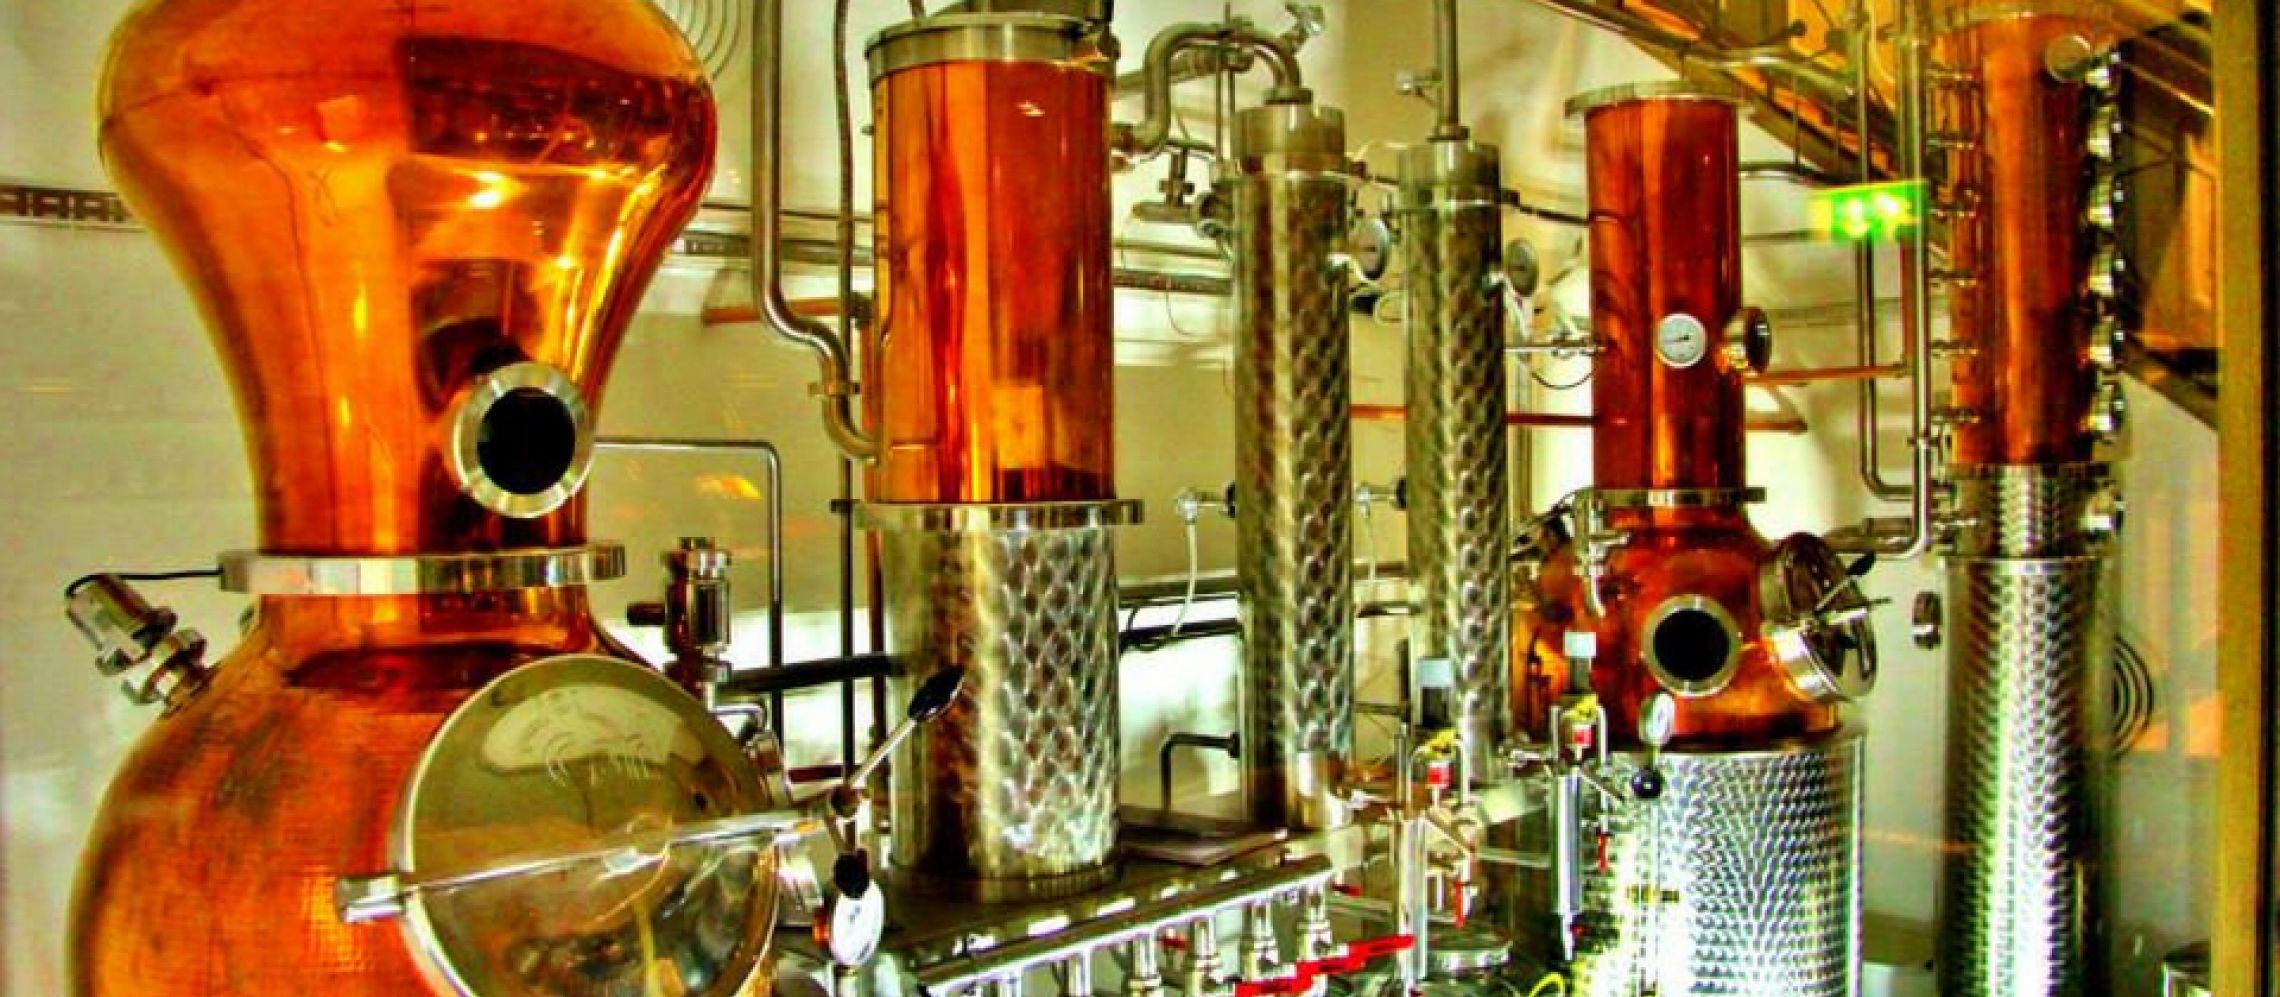 Photo for: City of London Distillery- Gin Distillery & Bar in The Heart of London City